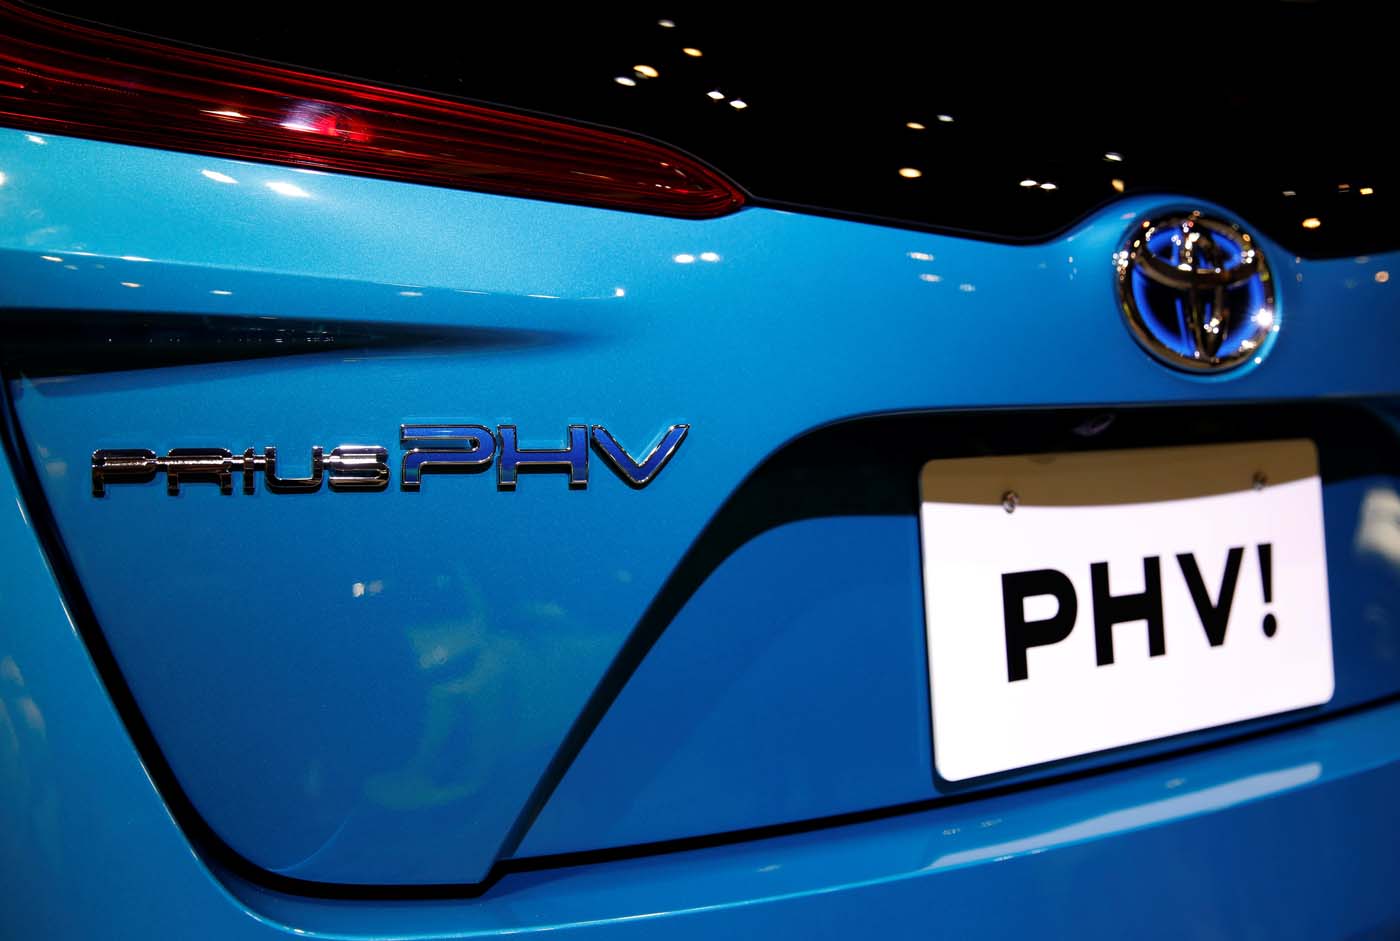 Toyota Motor Corp. displays the company's Prius PHV Plug-in-Hybrid vehicle, also known as Prius Prime in the U.S., during an event to mark the launch of the car in Japan, in Tokyo, Japan February 15, 2017. REUTERS/Issei Kato